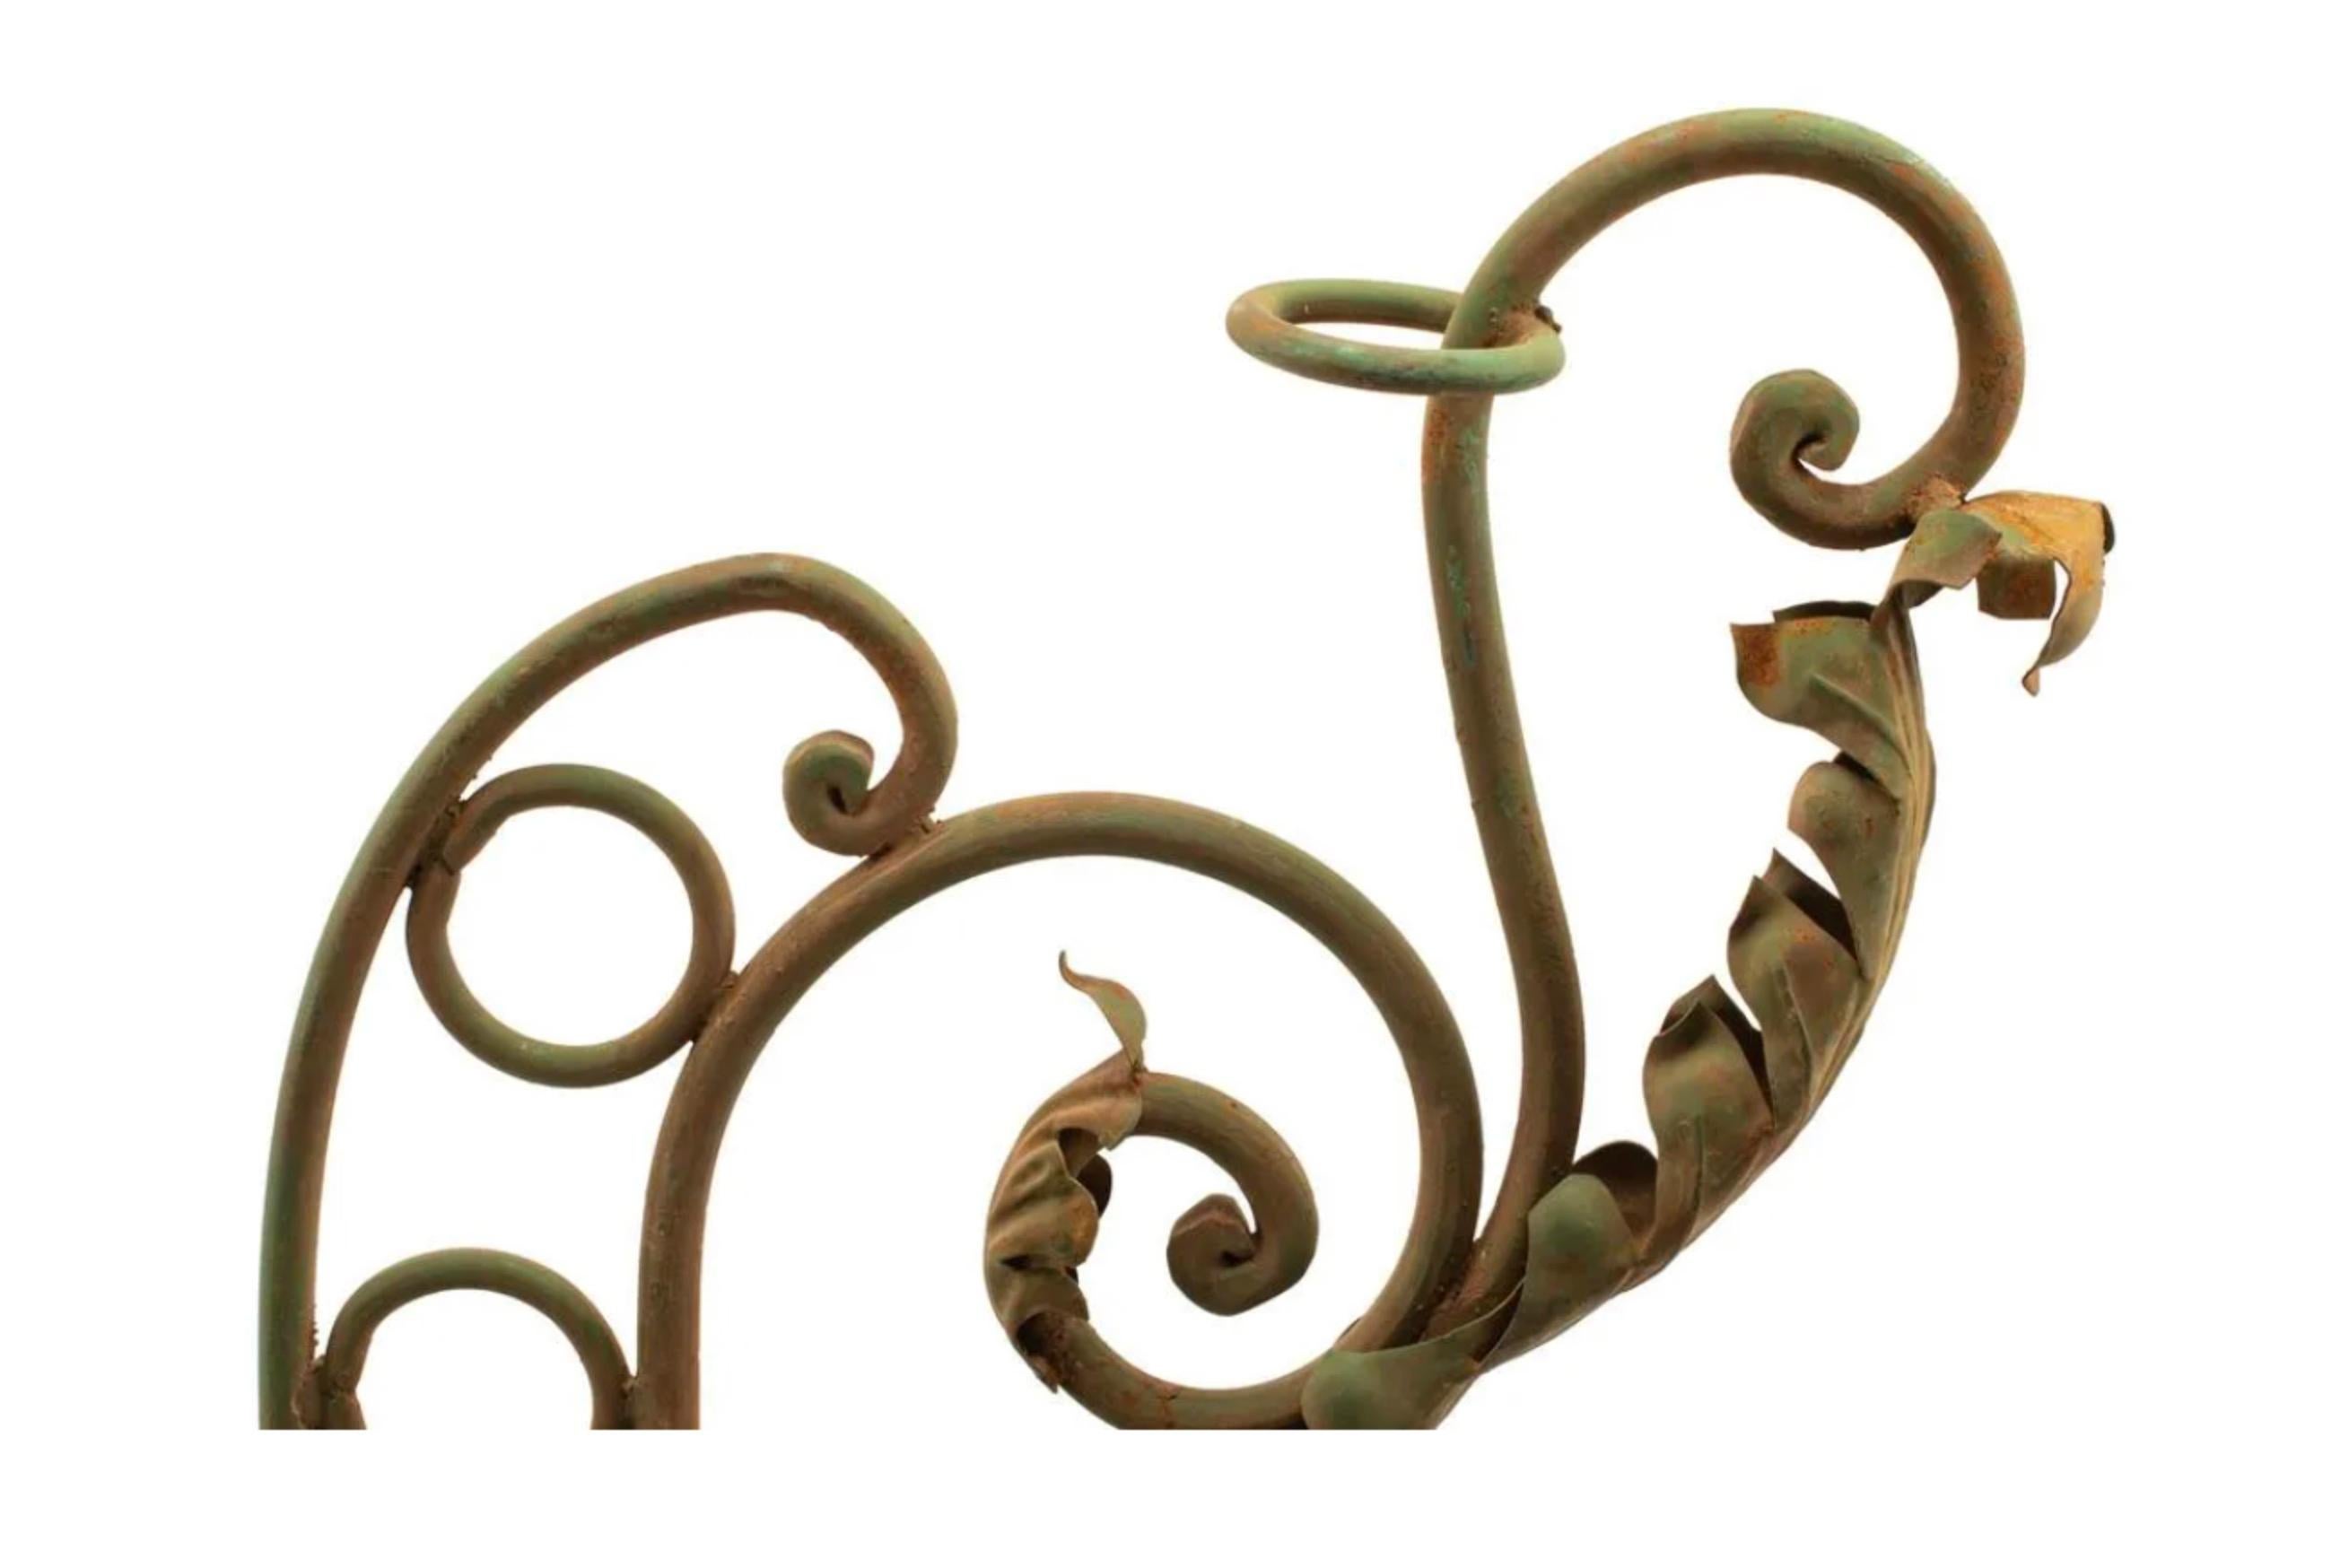 North American New Orleans Wrought Iron Foliate Scroll Sign Brackets - a Pair For Sale